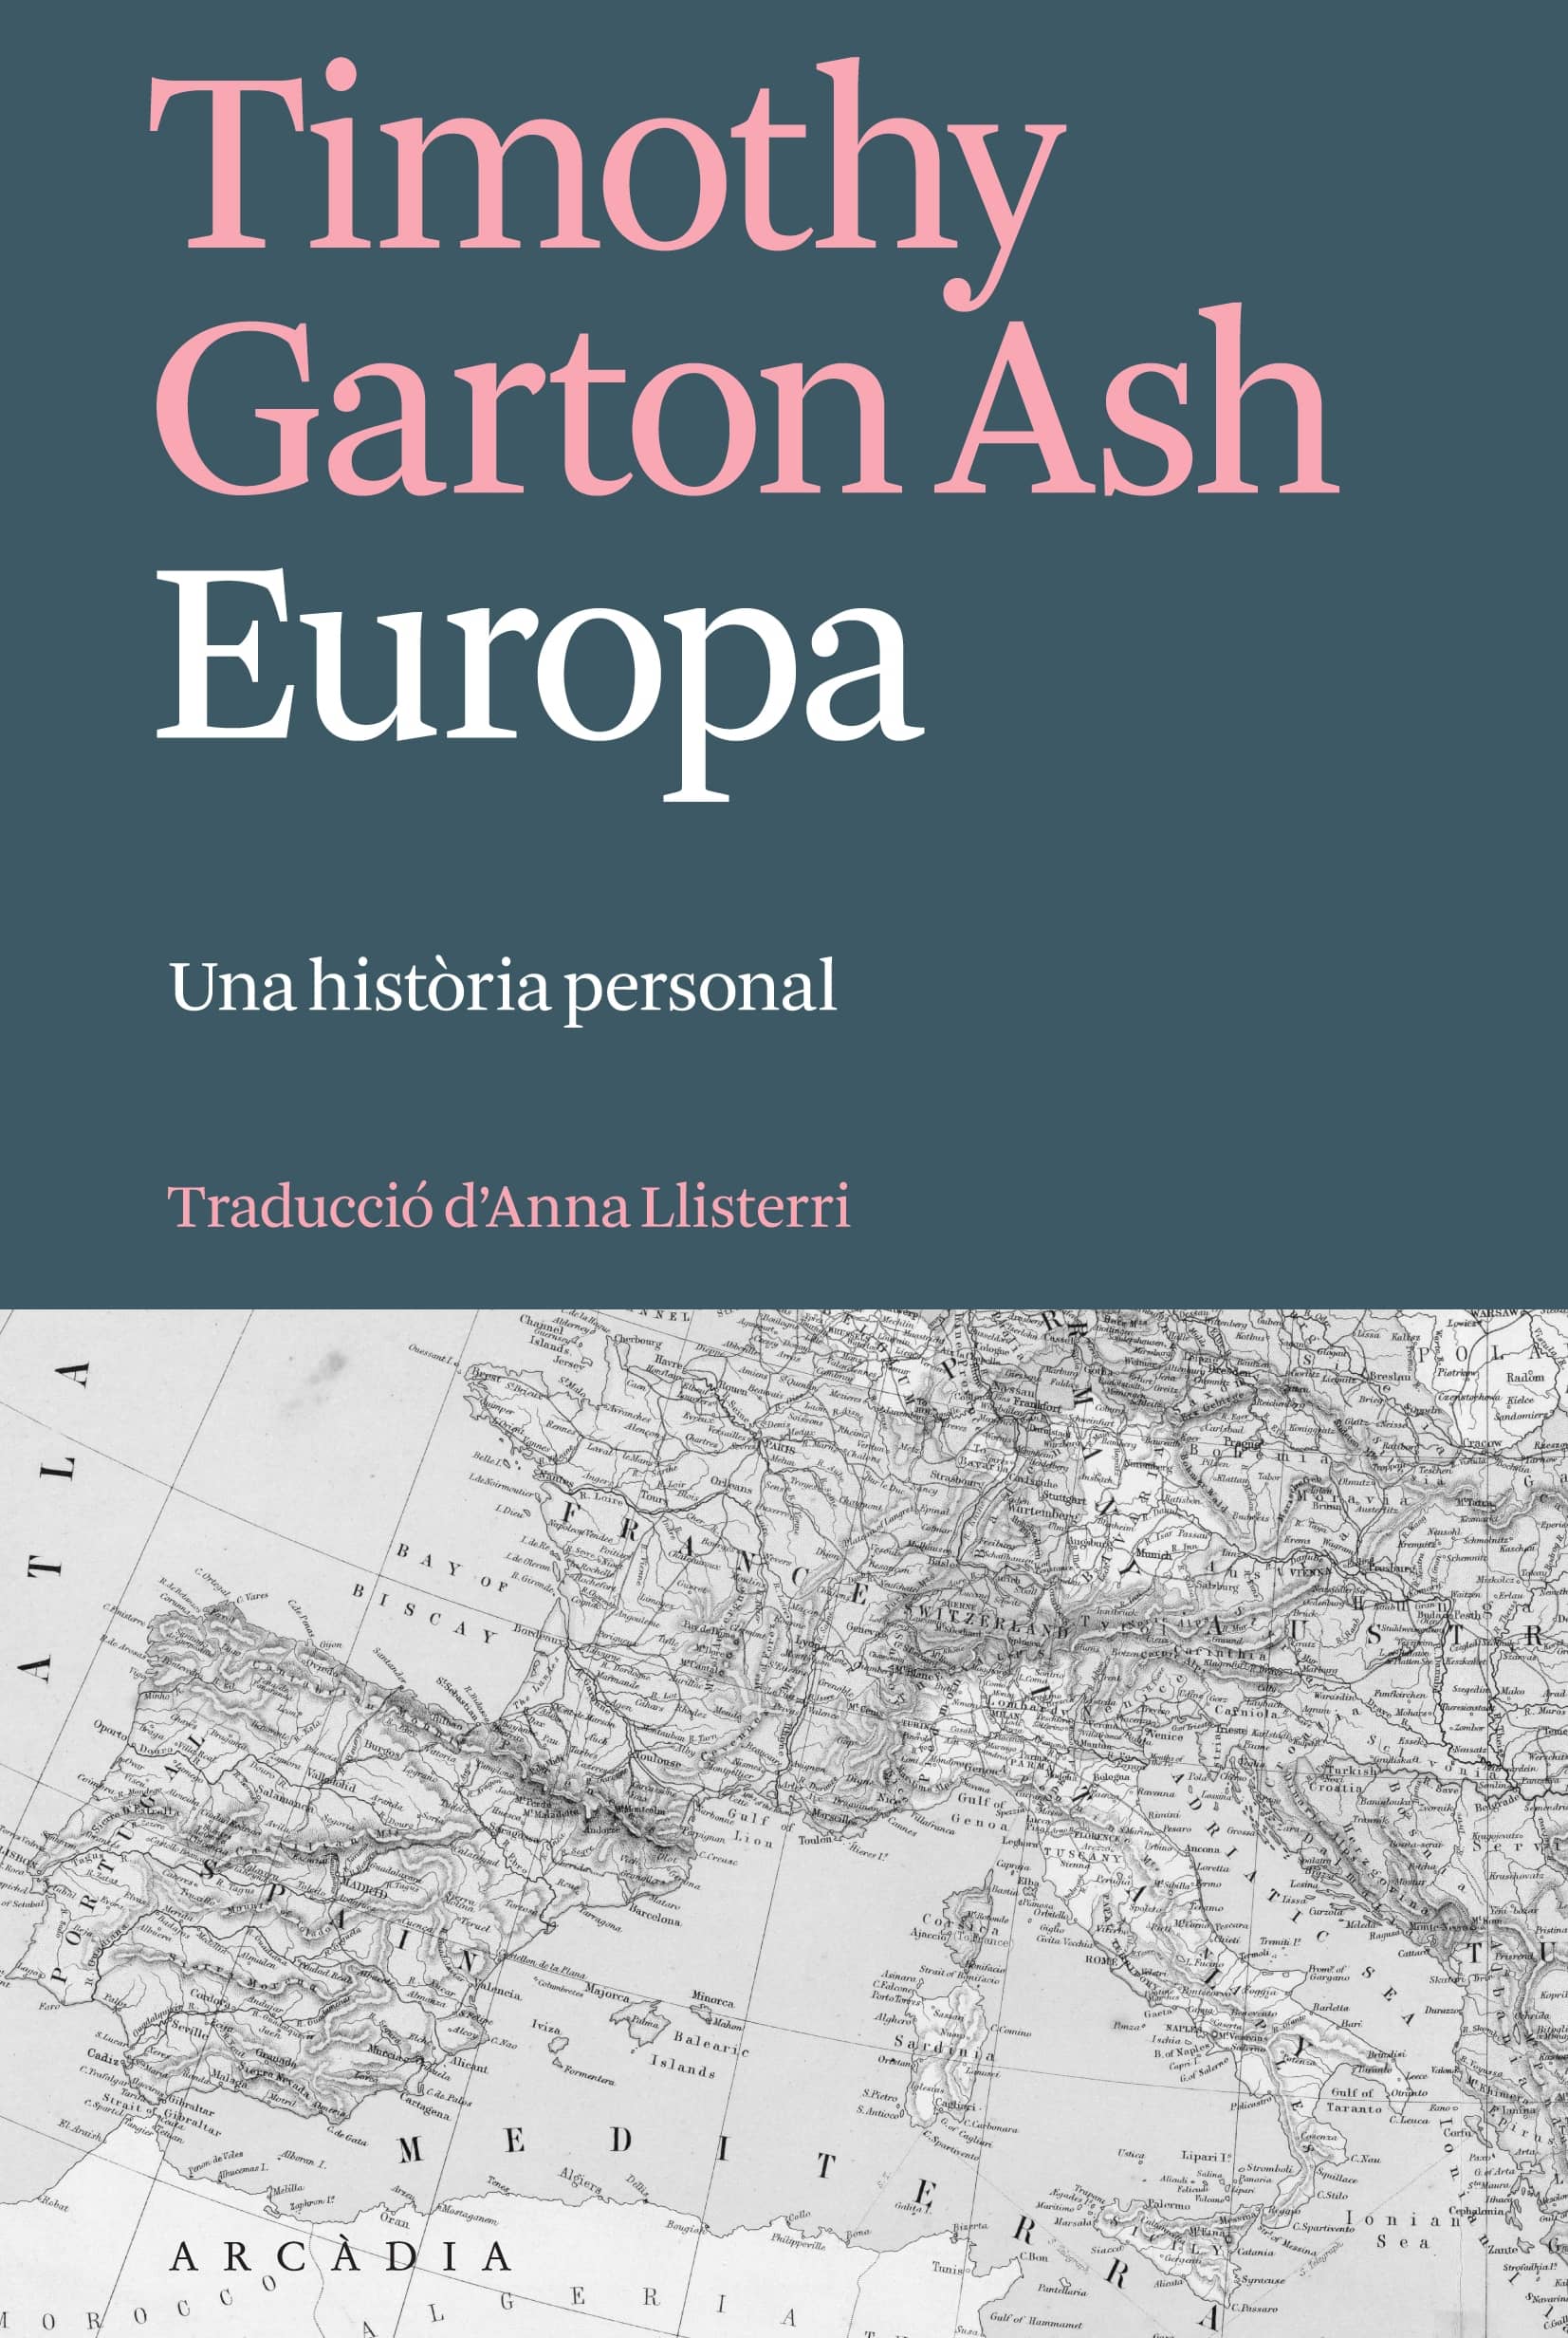 Catalan edition cover